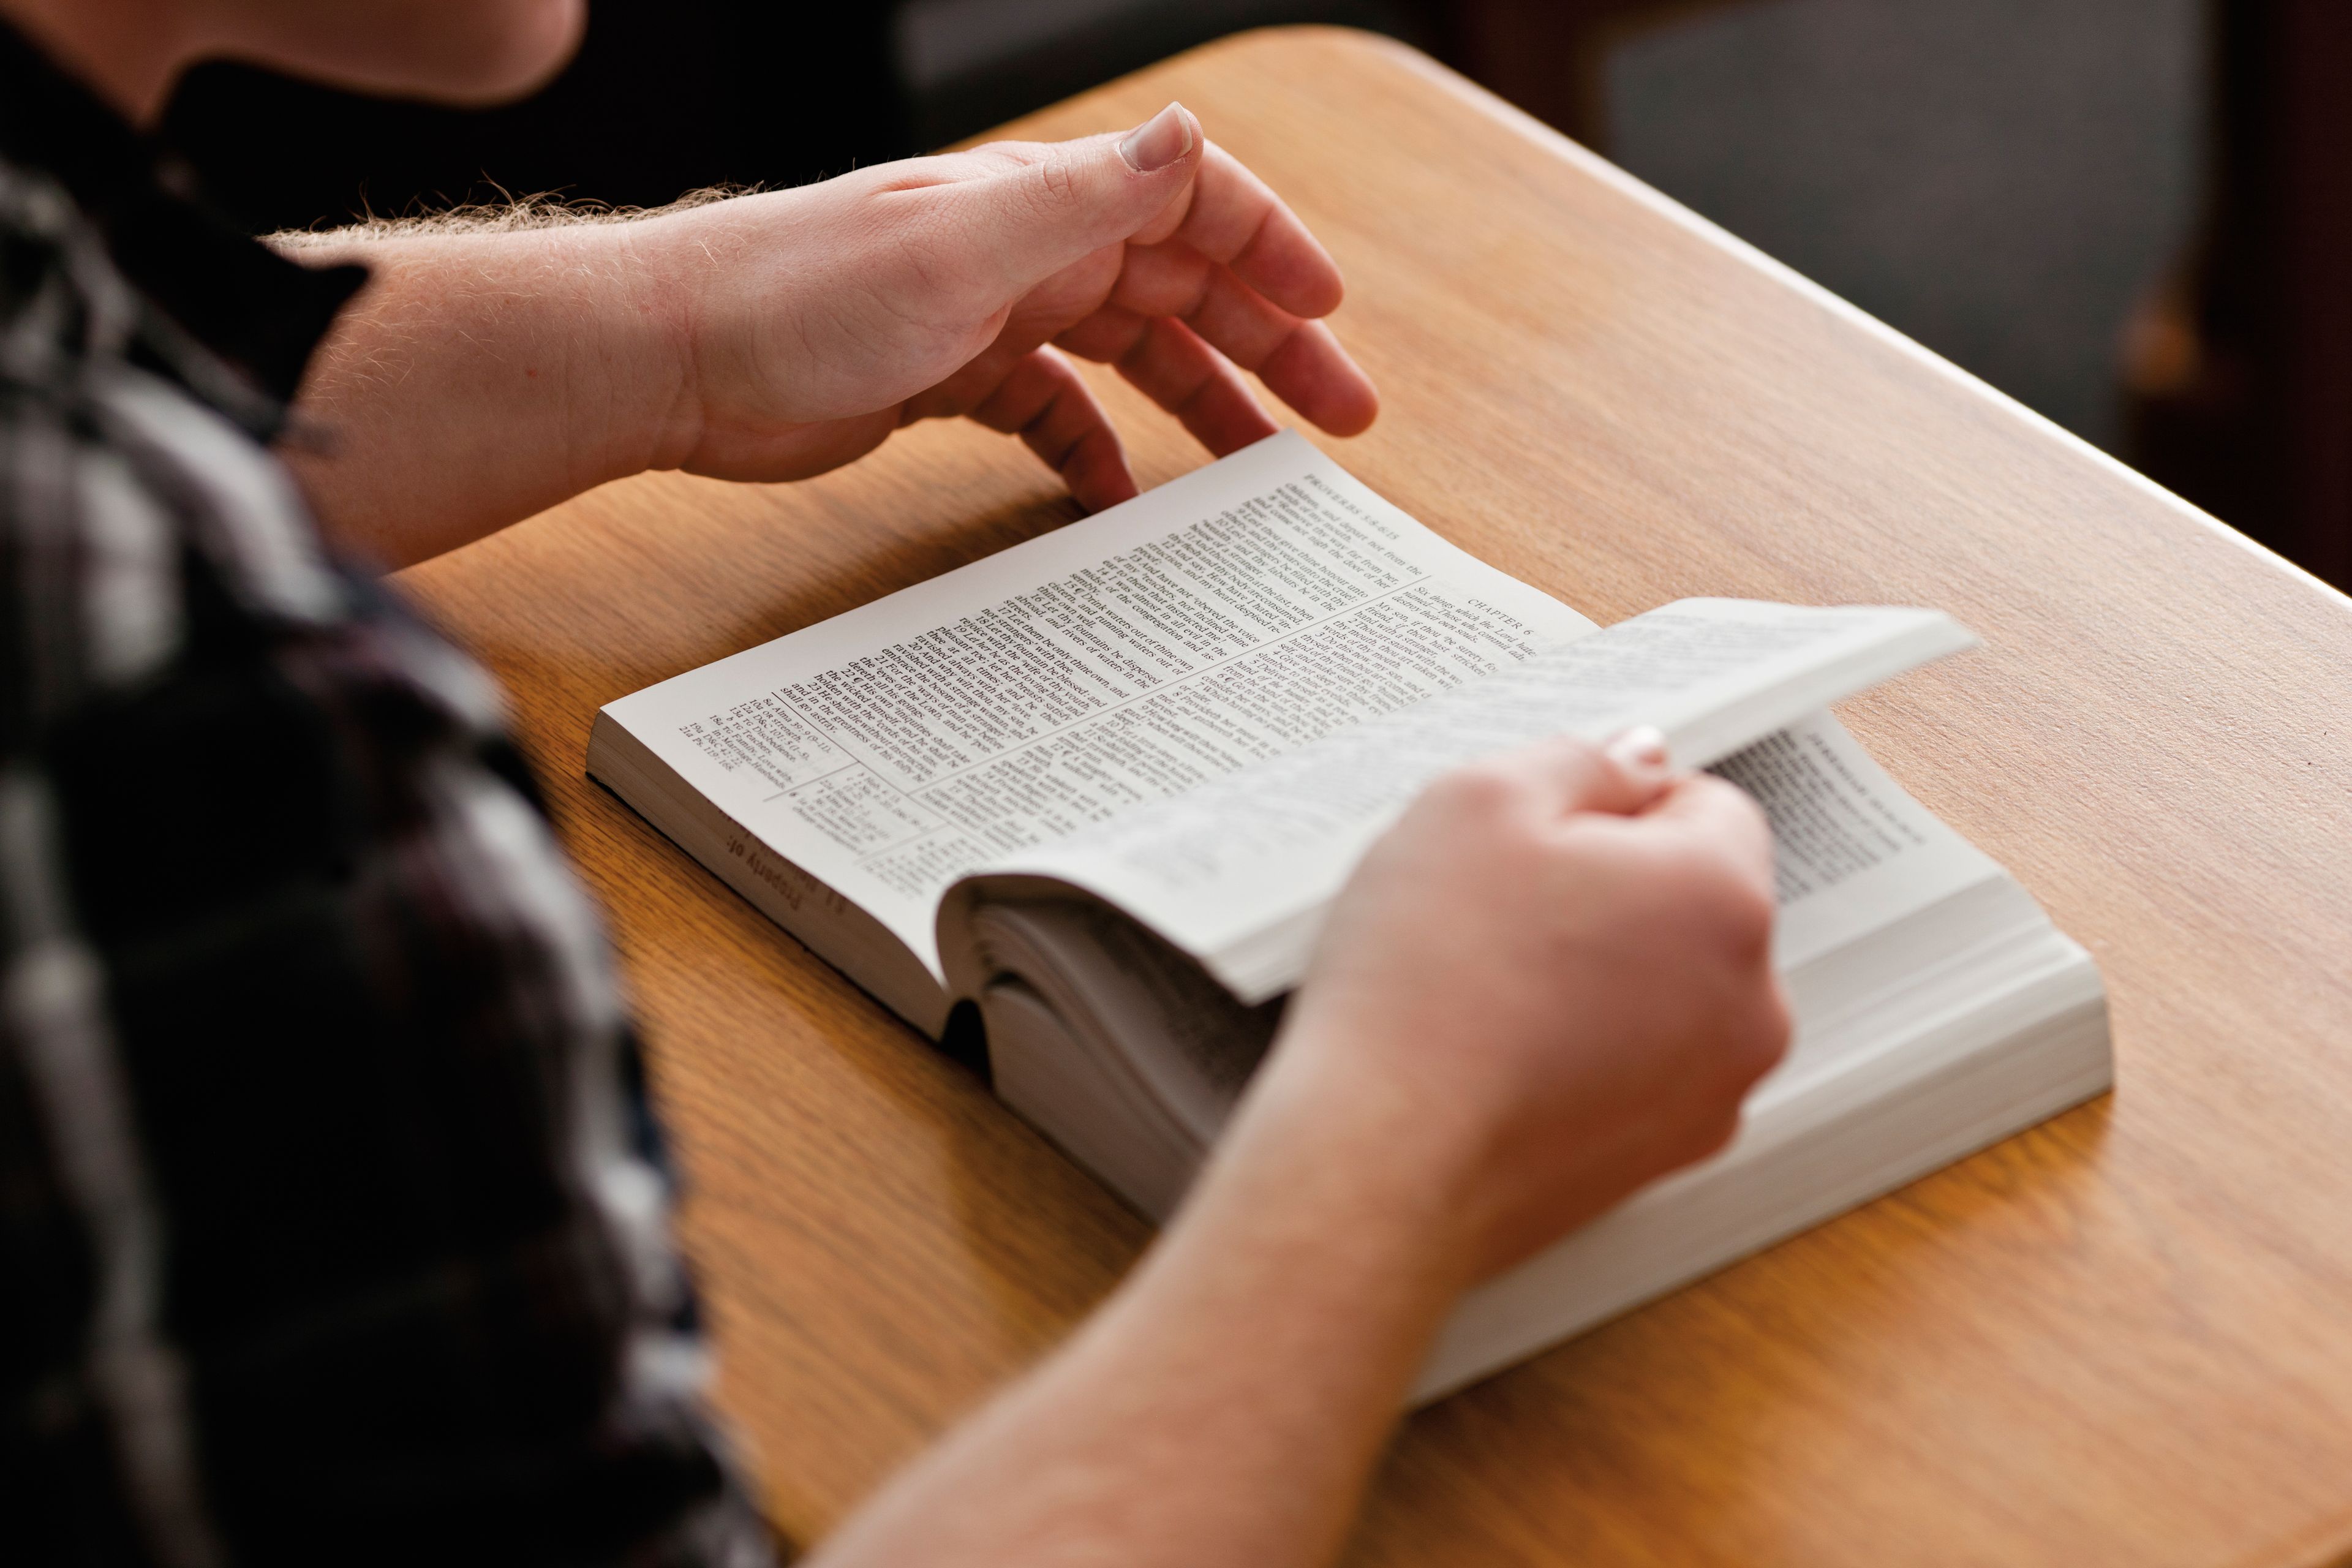 Hands flipping through the pages of a Bible on a desk.